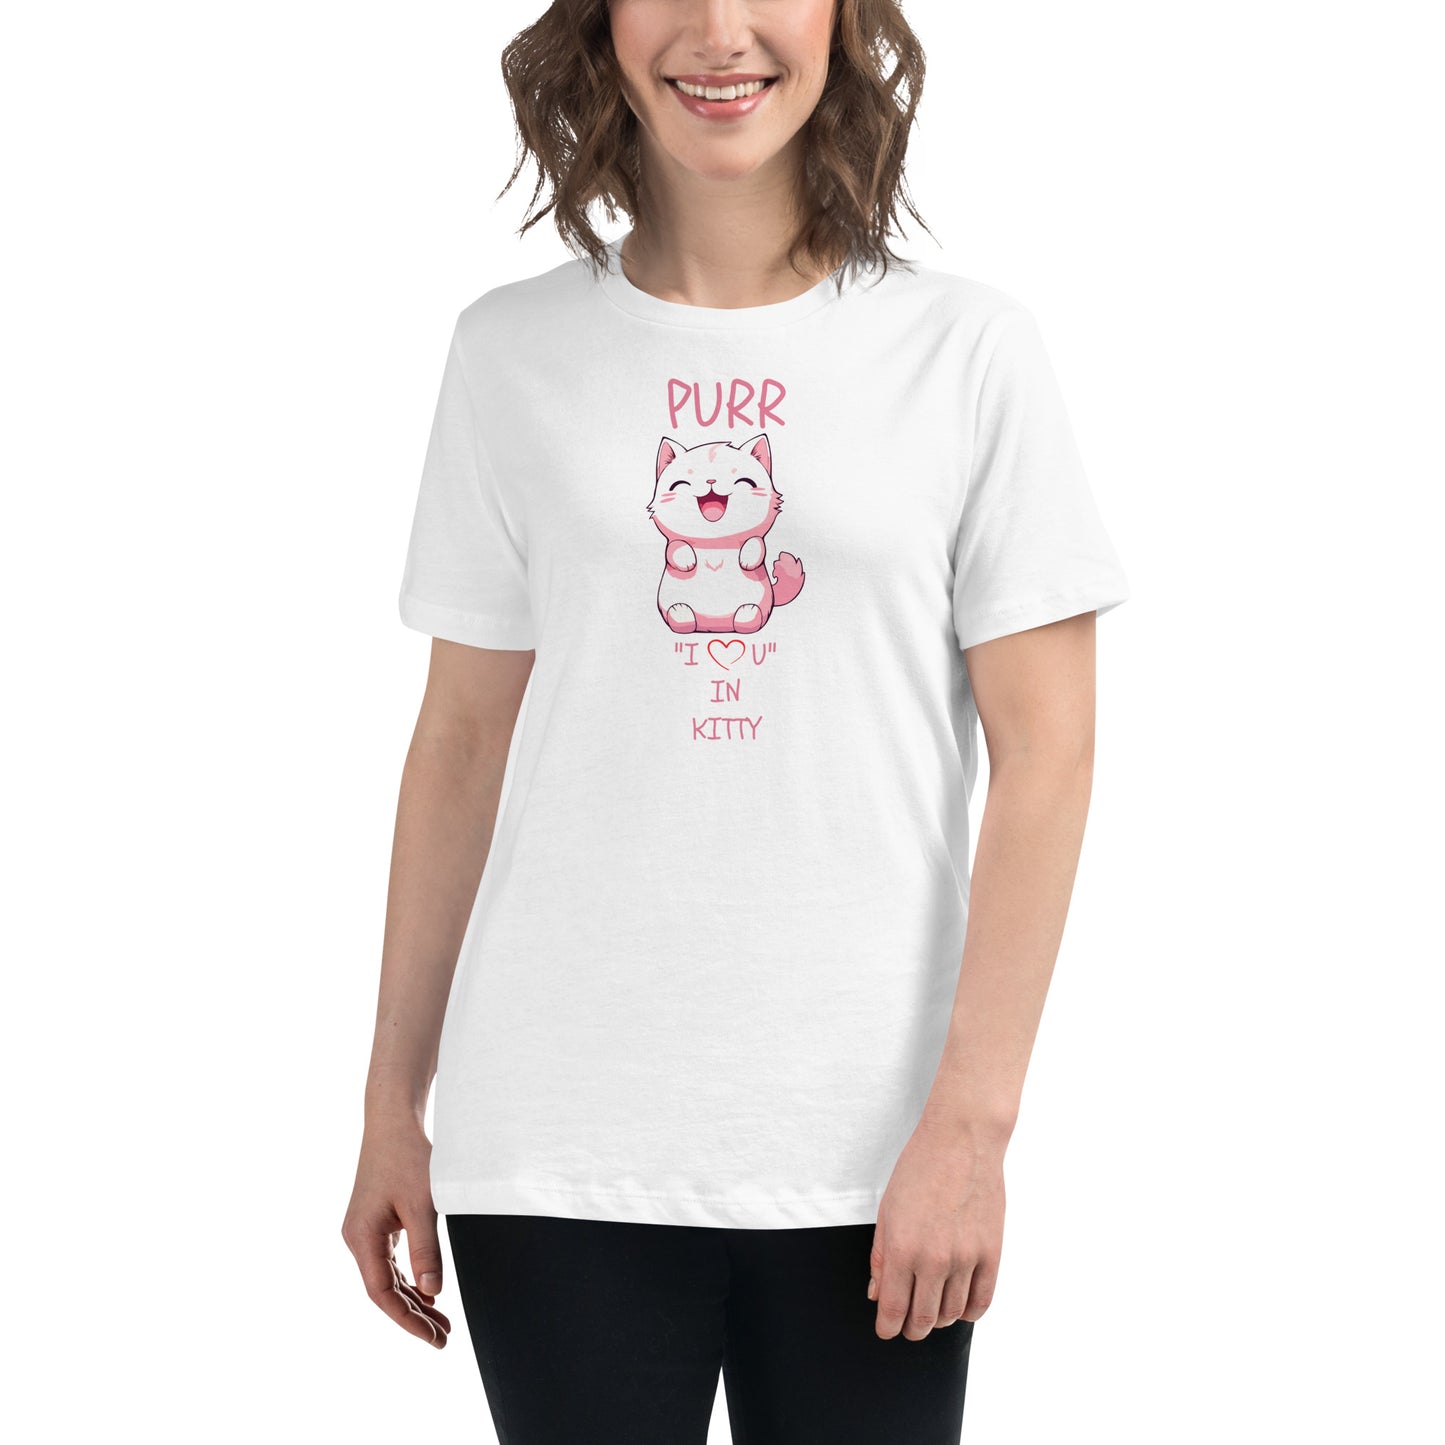 PURR "I LOVE U" IN KITTY Women's Relaxed T-Shirt